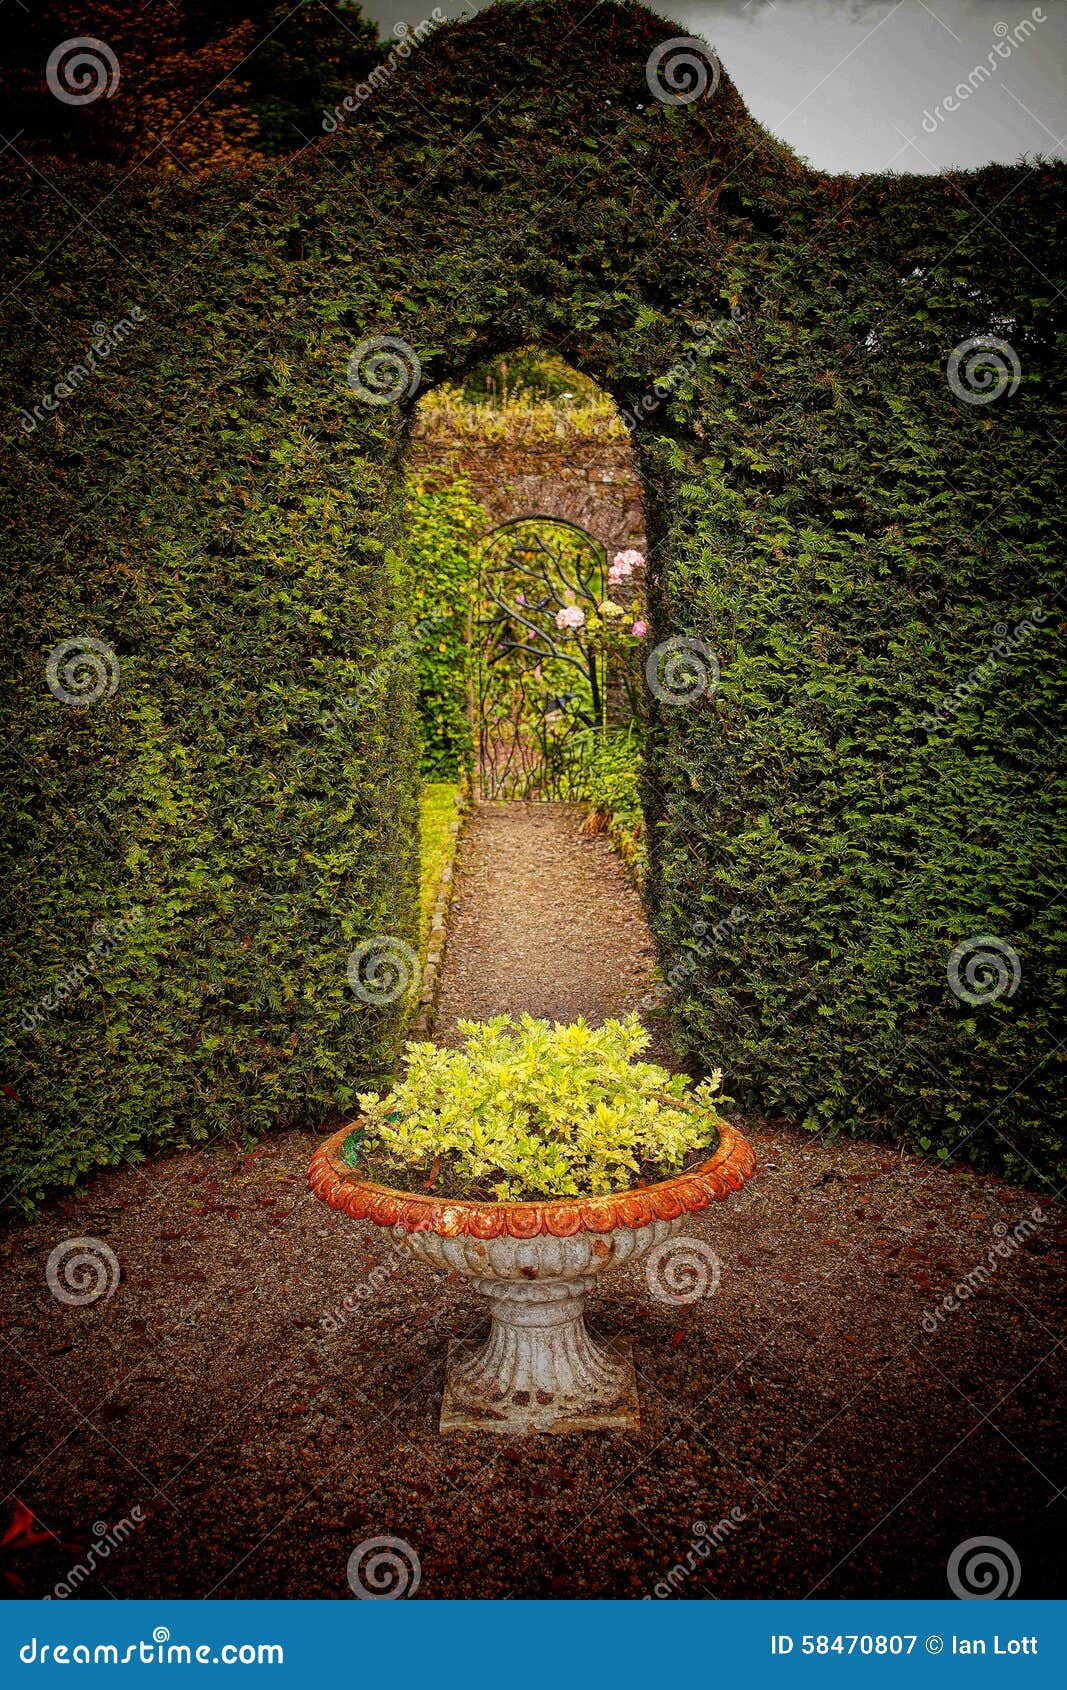 Hedges and gardens stock image. Image of devon, country - 58470807